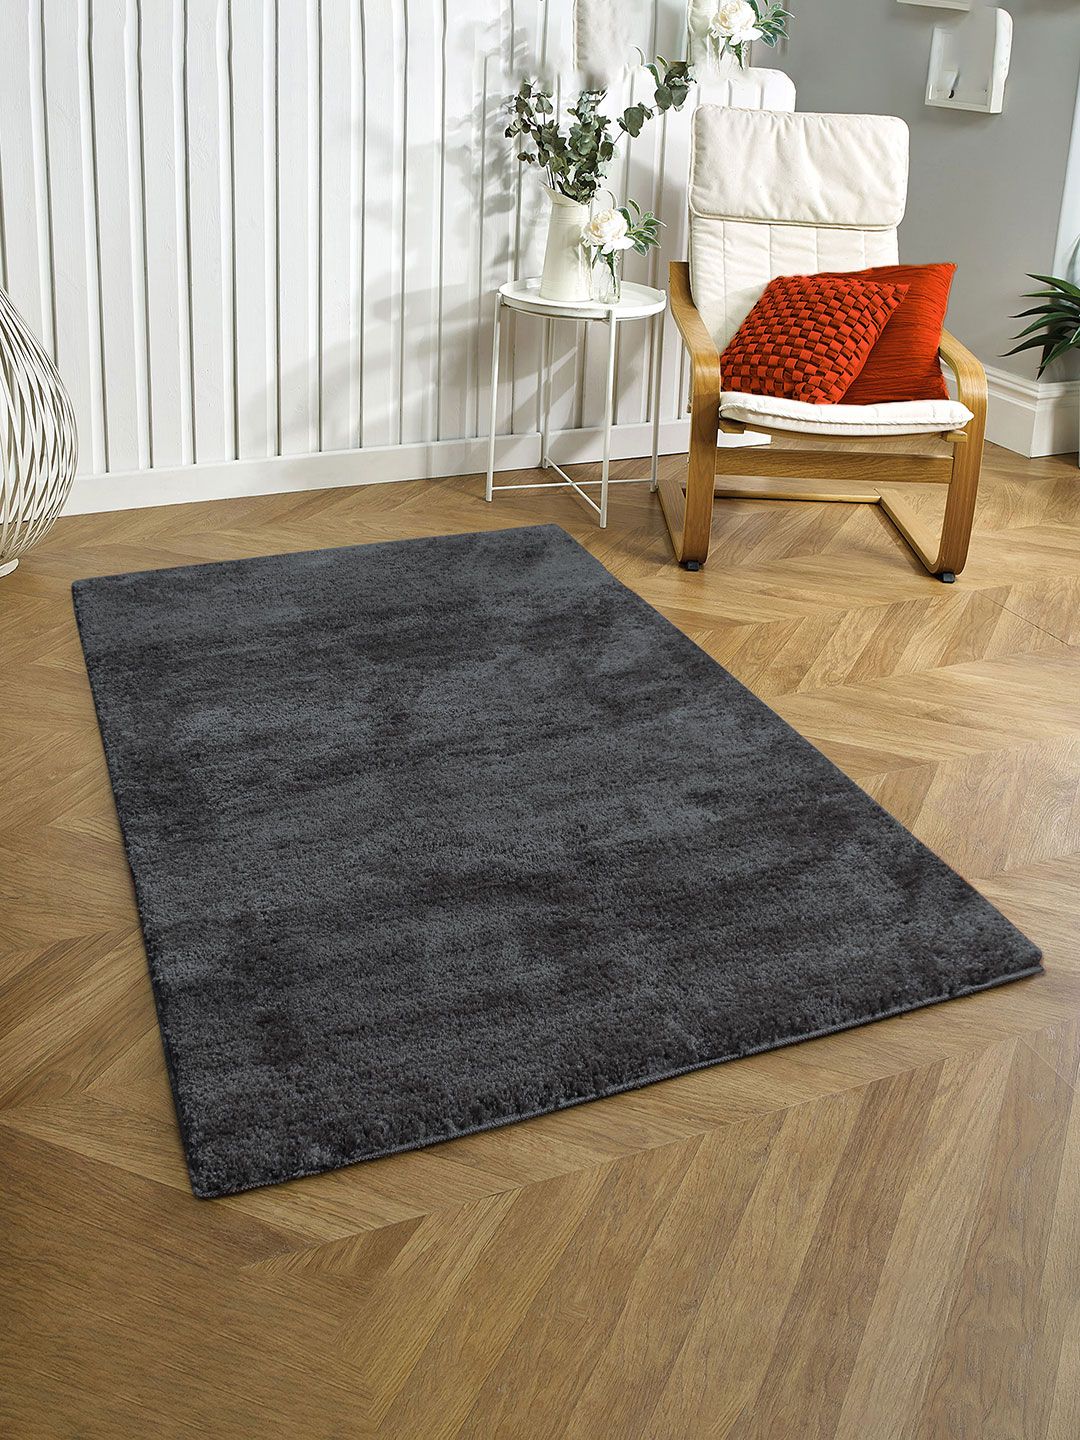 LUXEHOME INTERNATIONAL Grey Solid Anti Skid Carpet Price in India